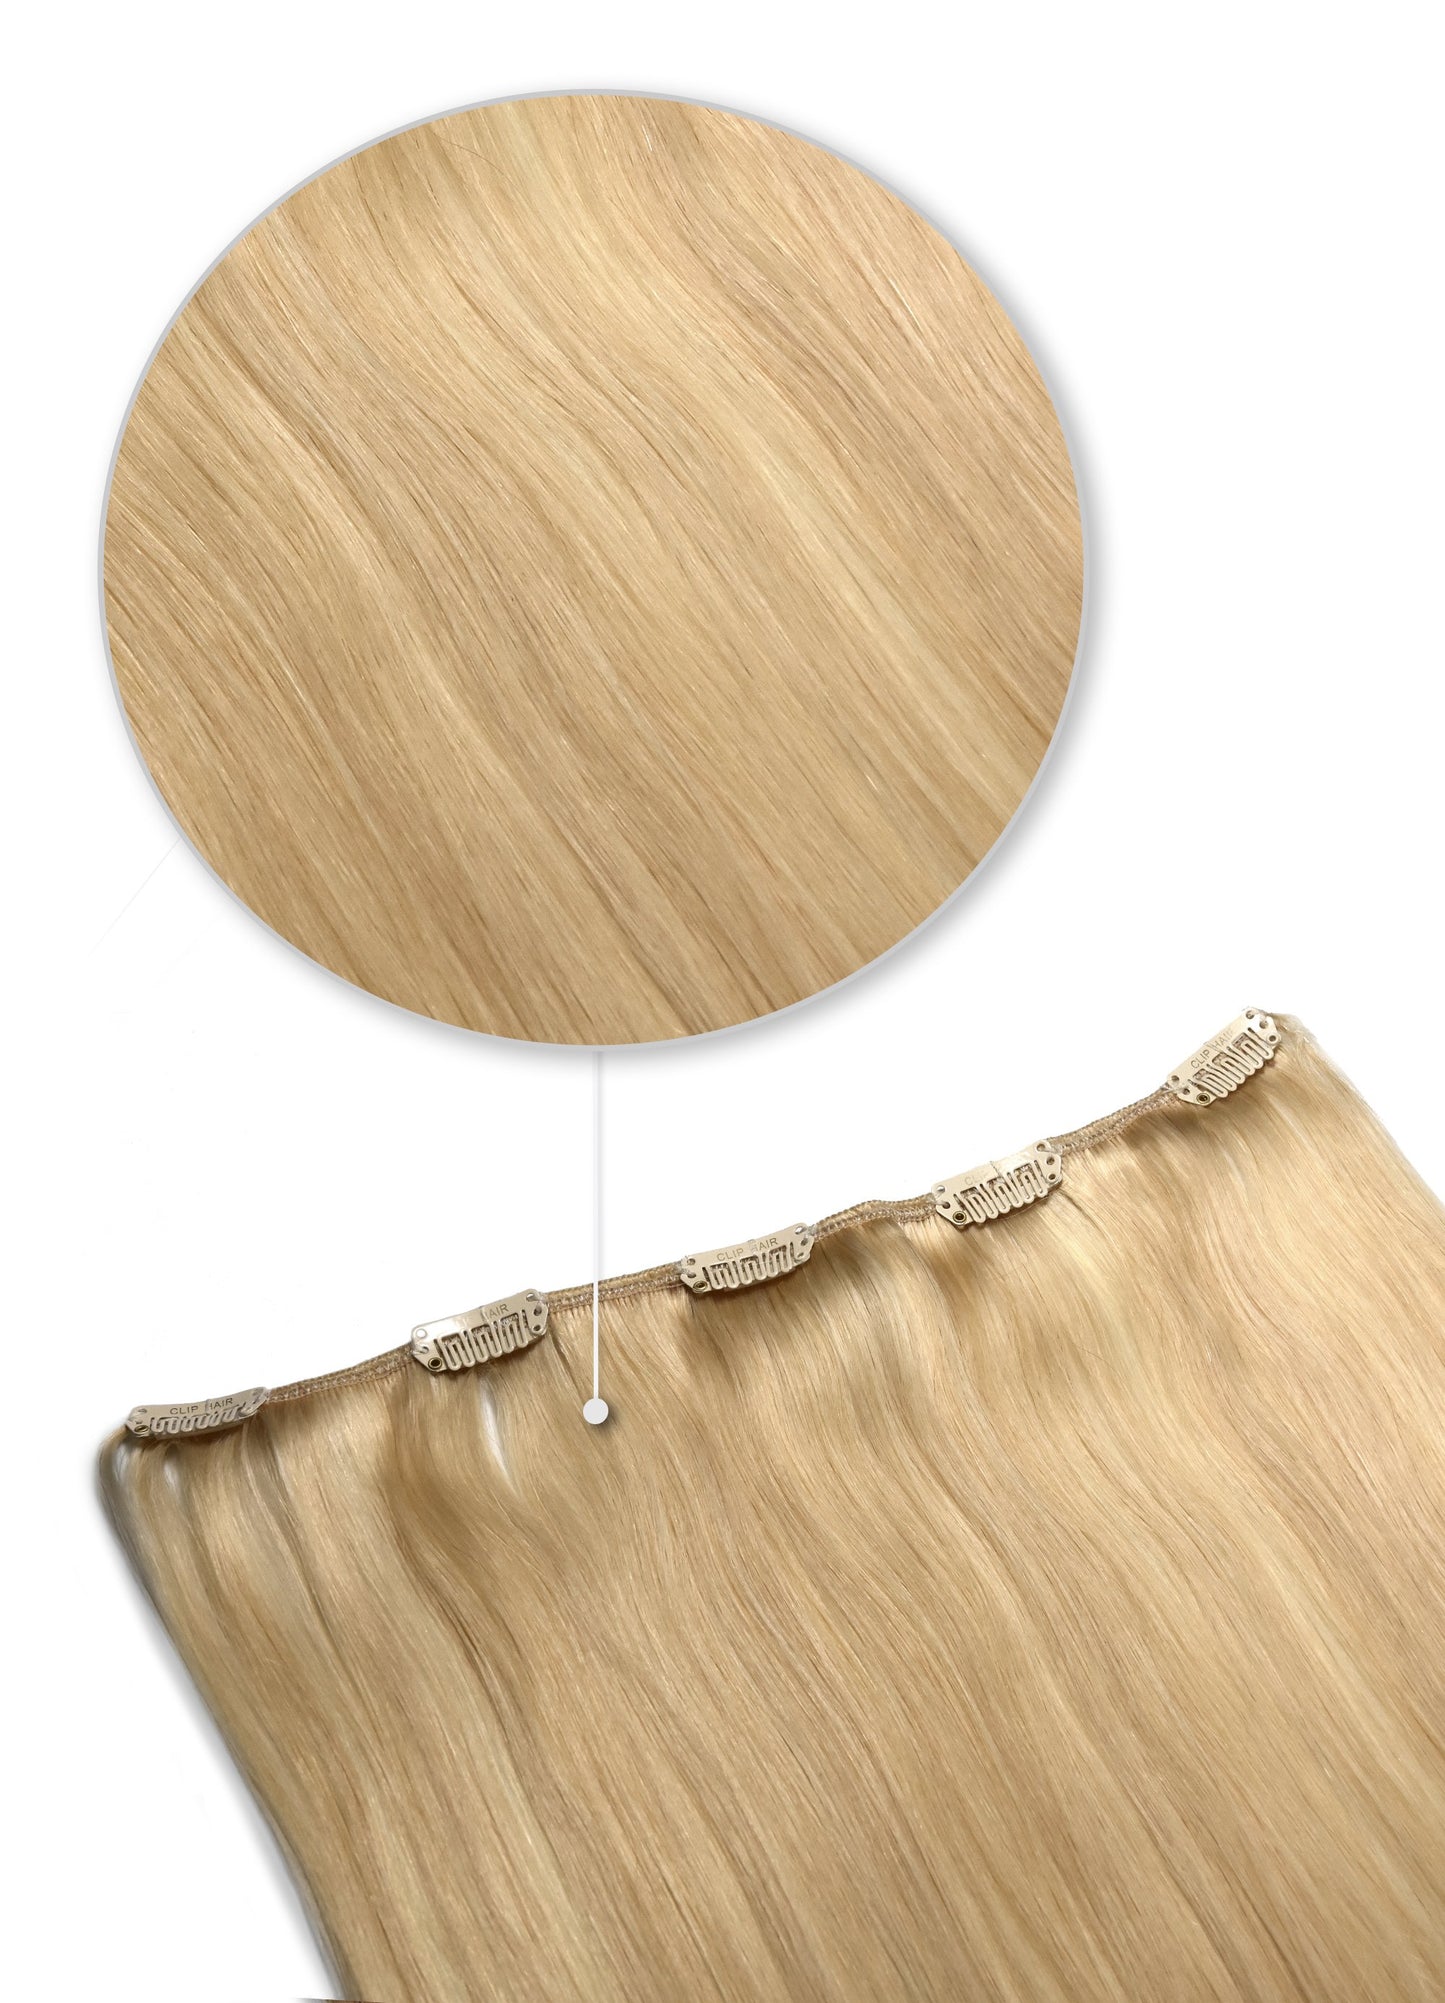 One Piece Top-up Remy Clip in Human Hair Extensions - Light Golden Blonde (#16)